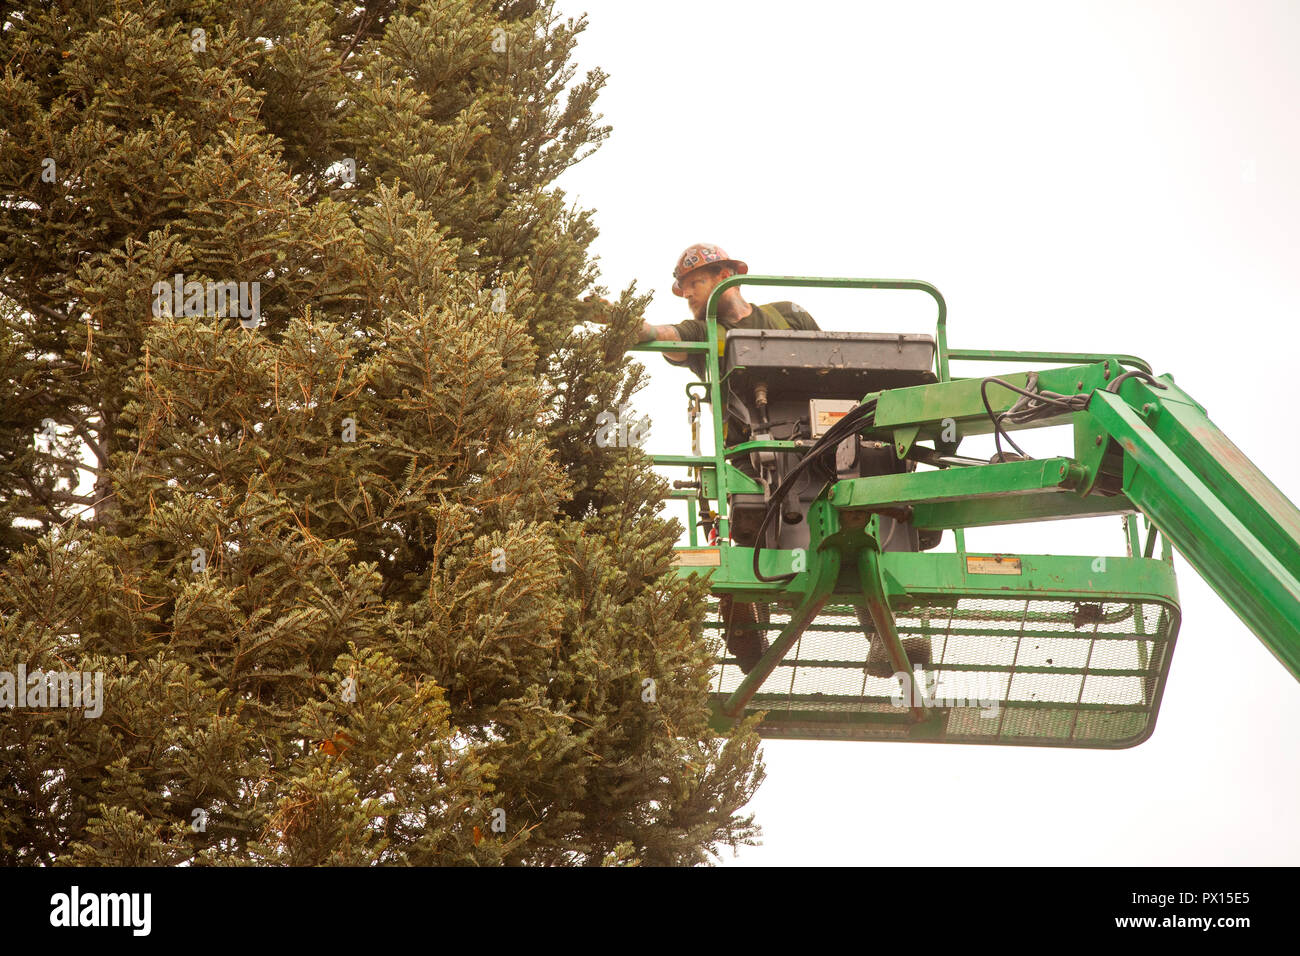 A workman on a cherry picker crane picks out loose tree branches on a holiday Christmas tree being installed in a luxury shopping mall in Newport Beach, CA  (Photo by Spencer Grant) Stock Photo